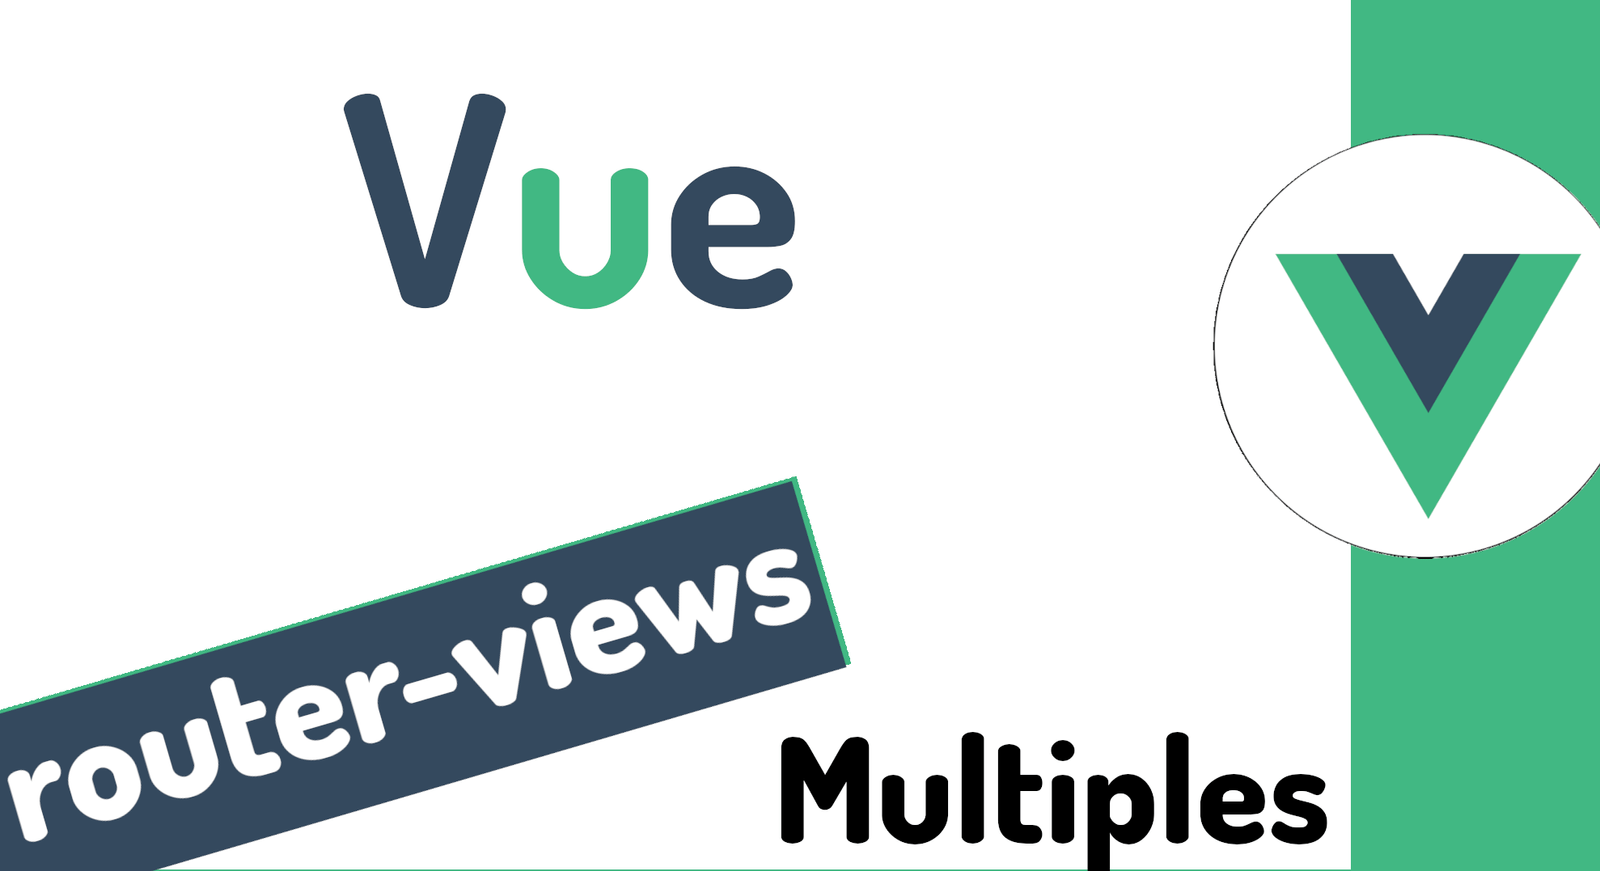 In Vue.js, how to use multiple router-views, in one component?